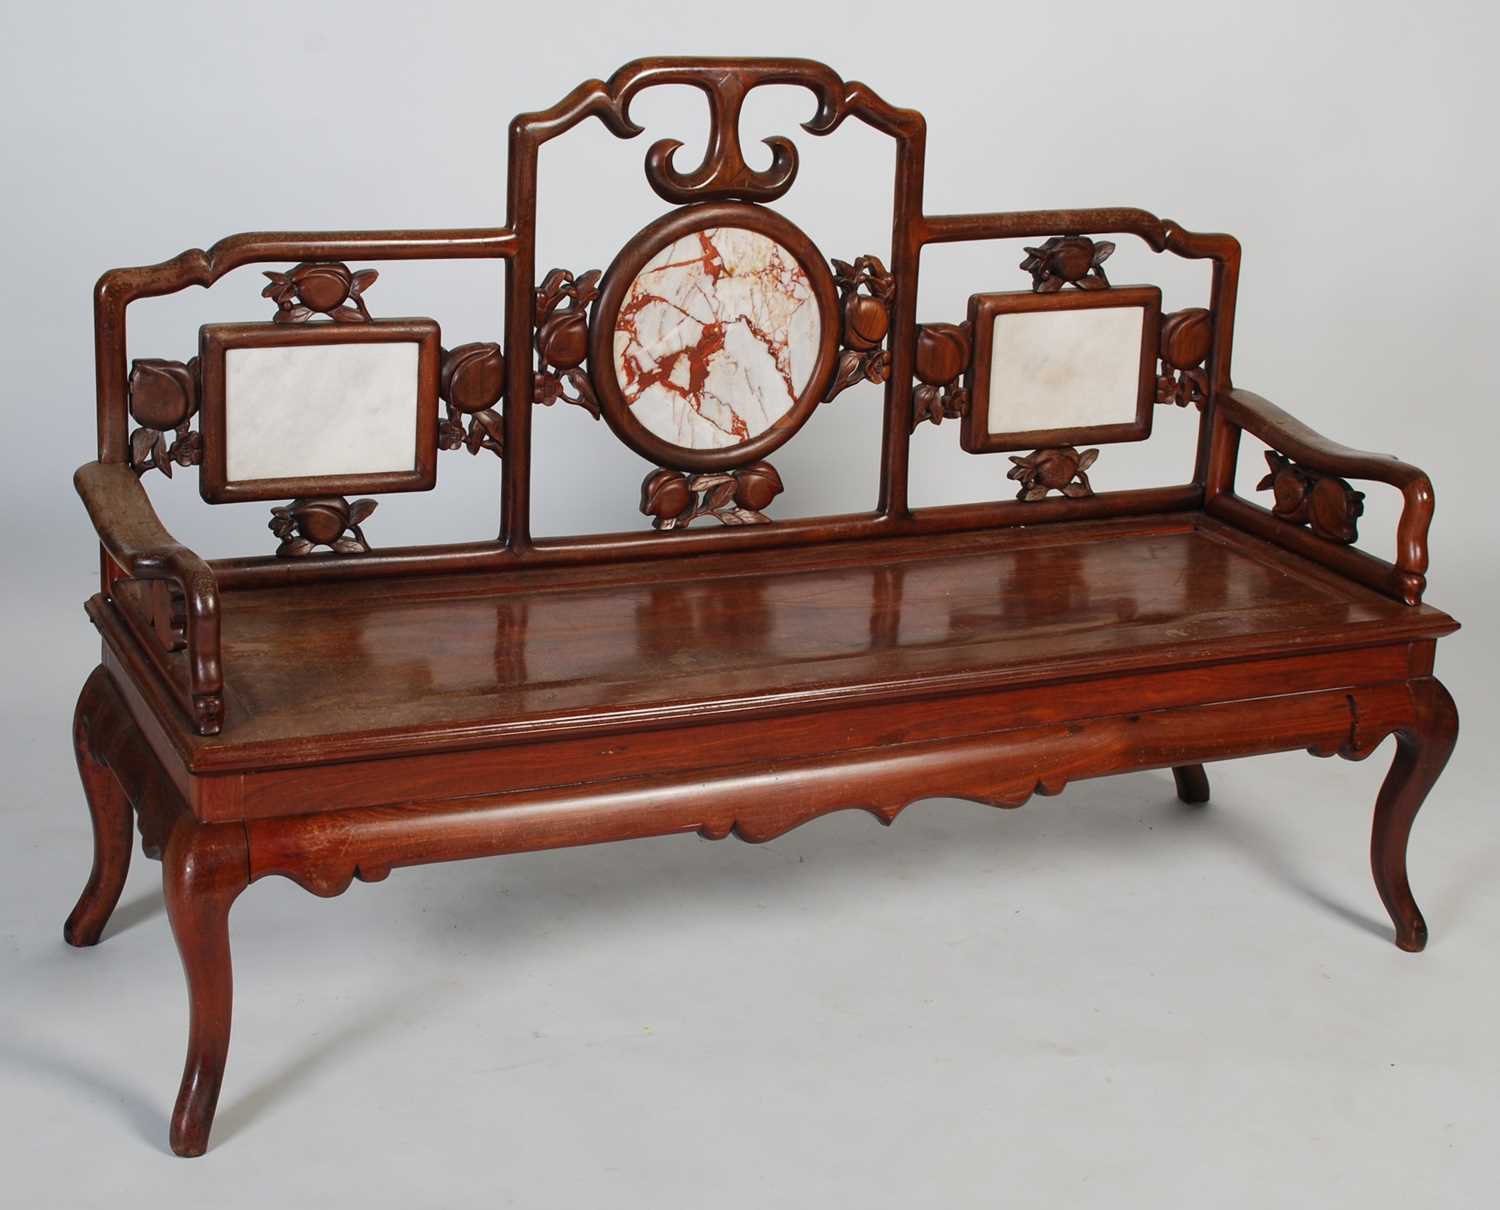 A Chinese dark wood and marble bench, late 19th/ early 20th century, the upright back centred with a